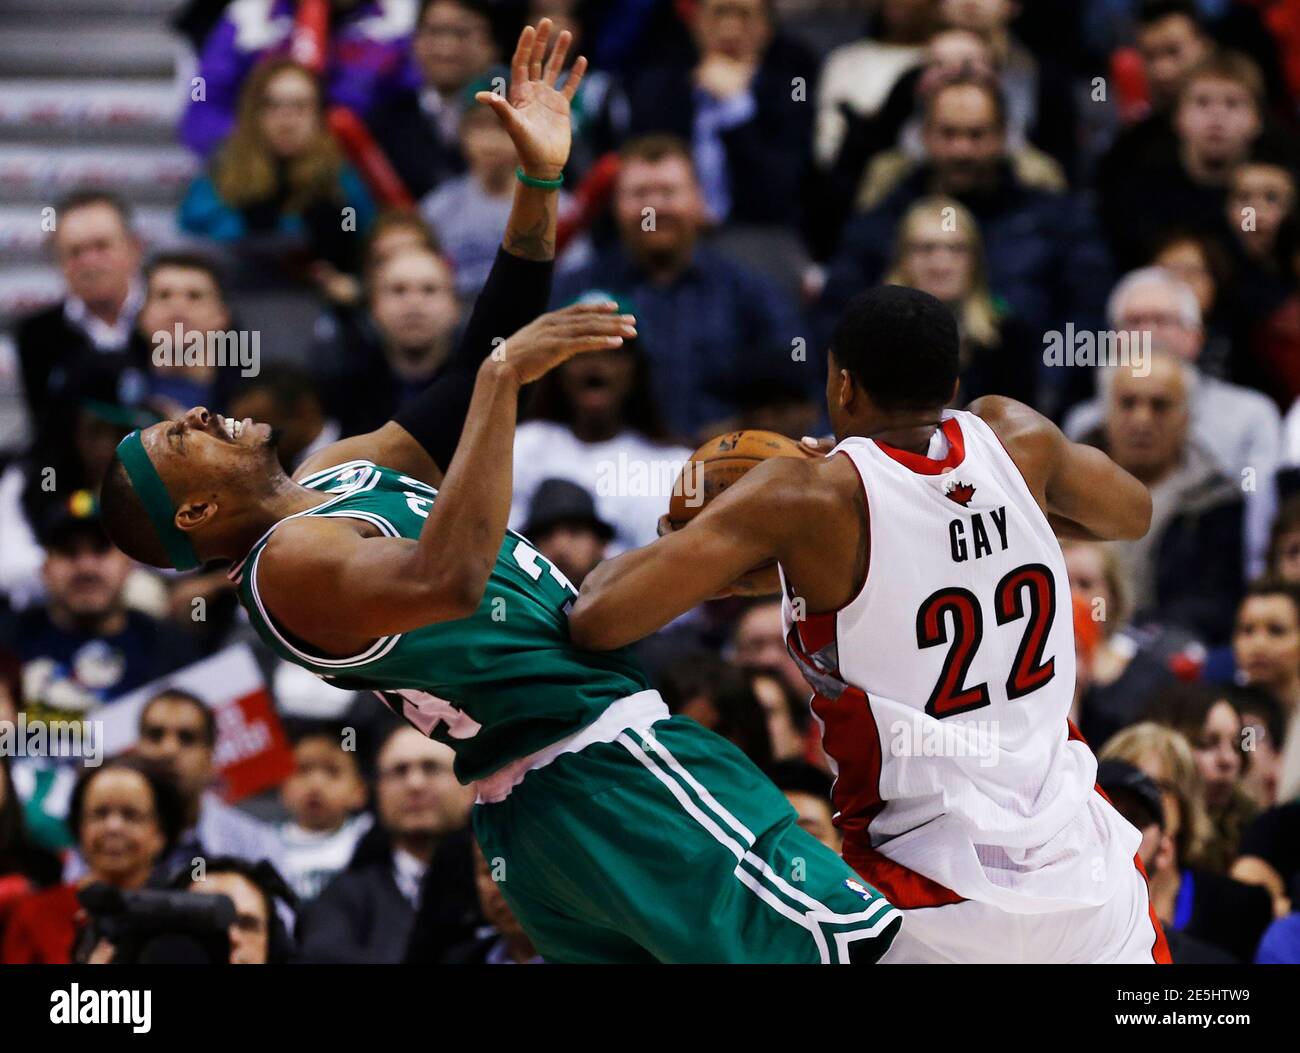 Toronto Raptors' Rudy Gay commits an offensive foul on Boston Celtics' Paul  Pierce (L) during the second half of their NBA basketball game in Toronto,  February 6, 2013. REUTERS/Mark Blinch (CANADA -